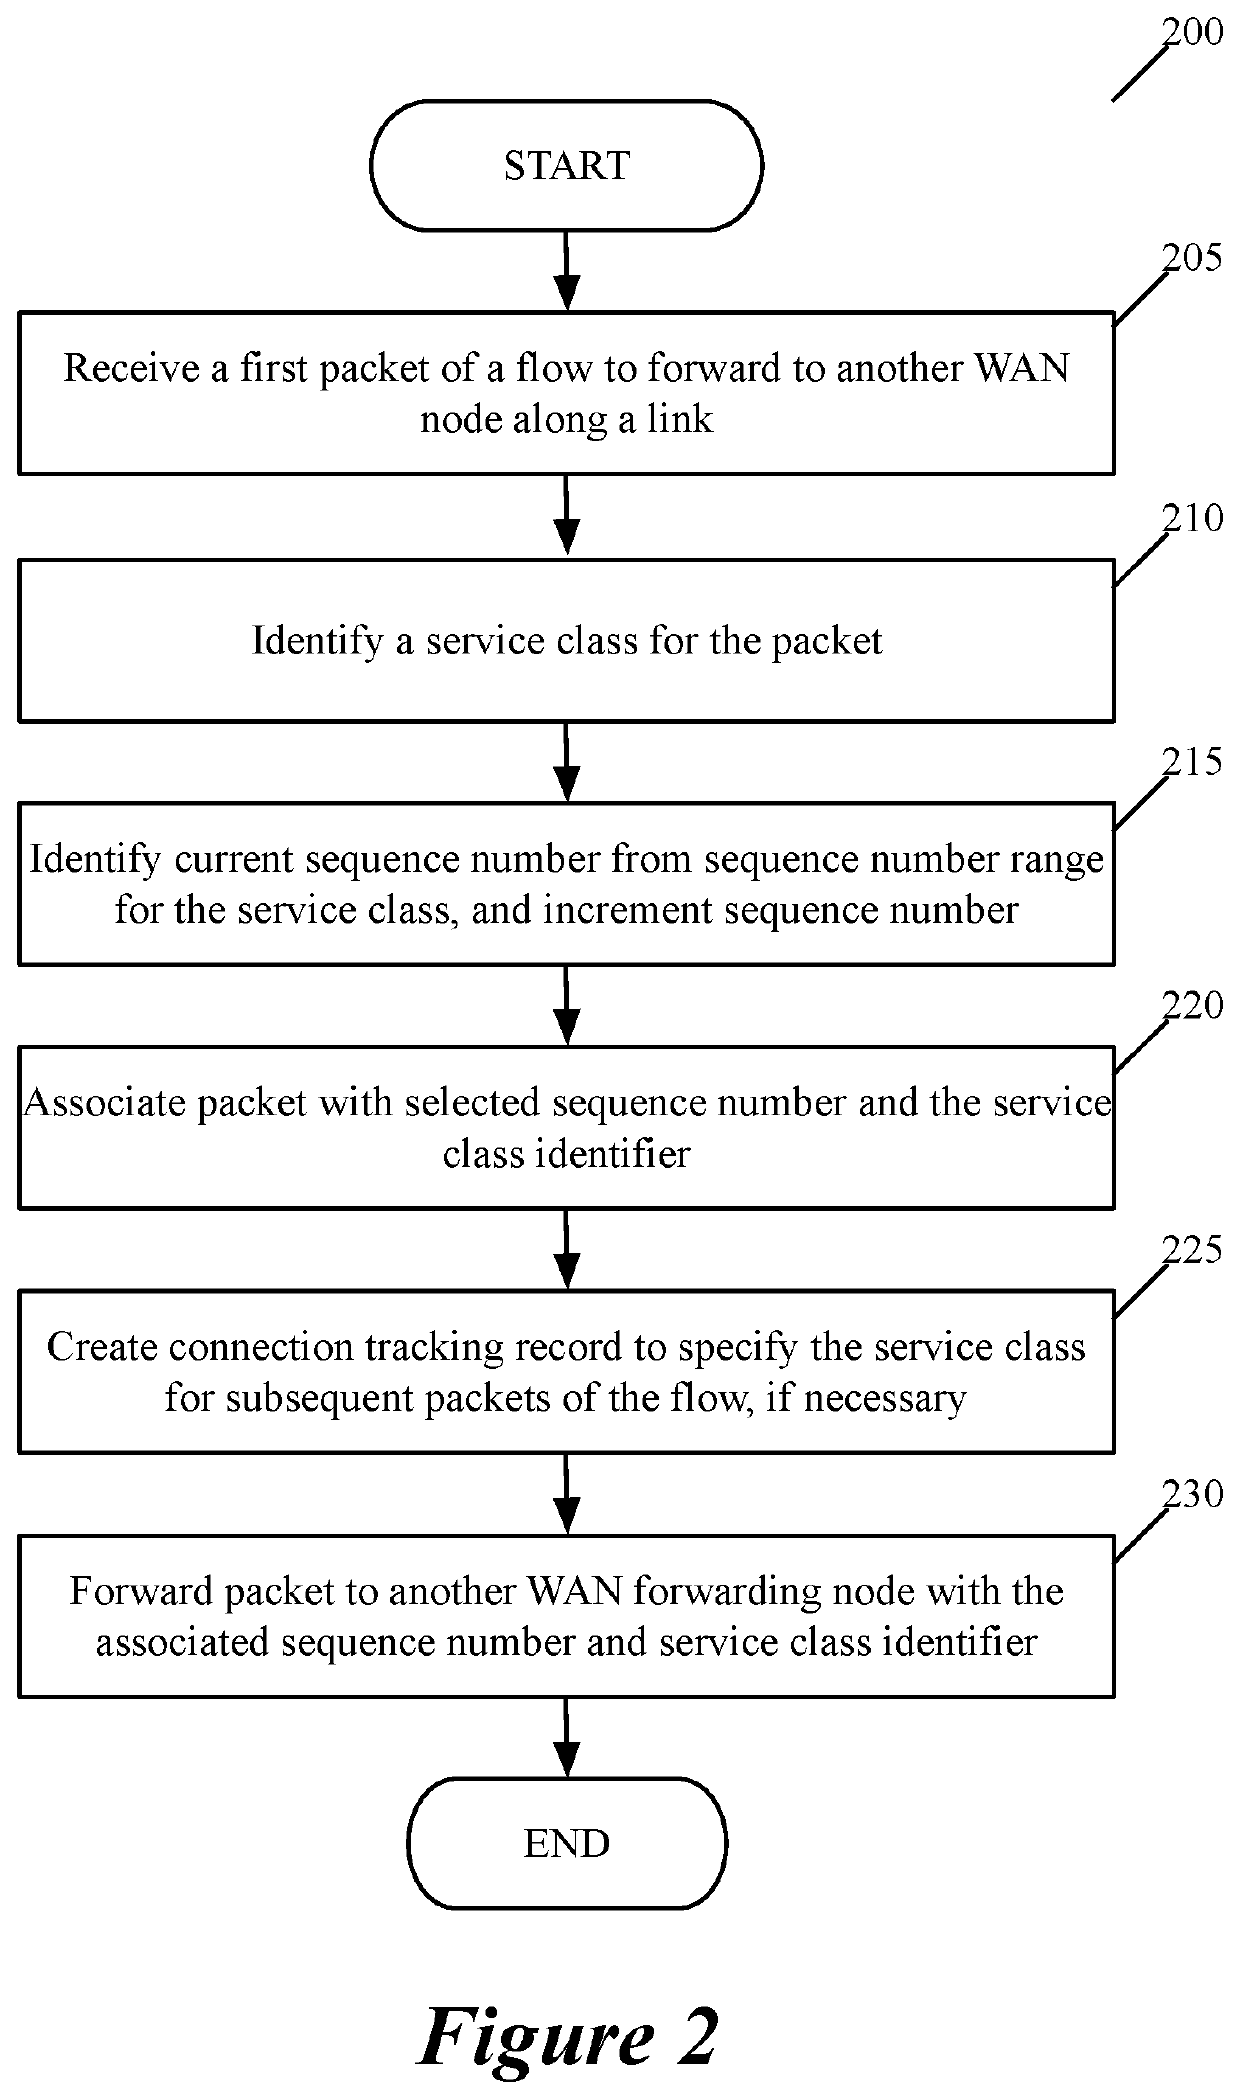 Dynamically assigning service classes for a QOS aware network link